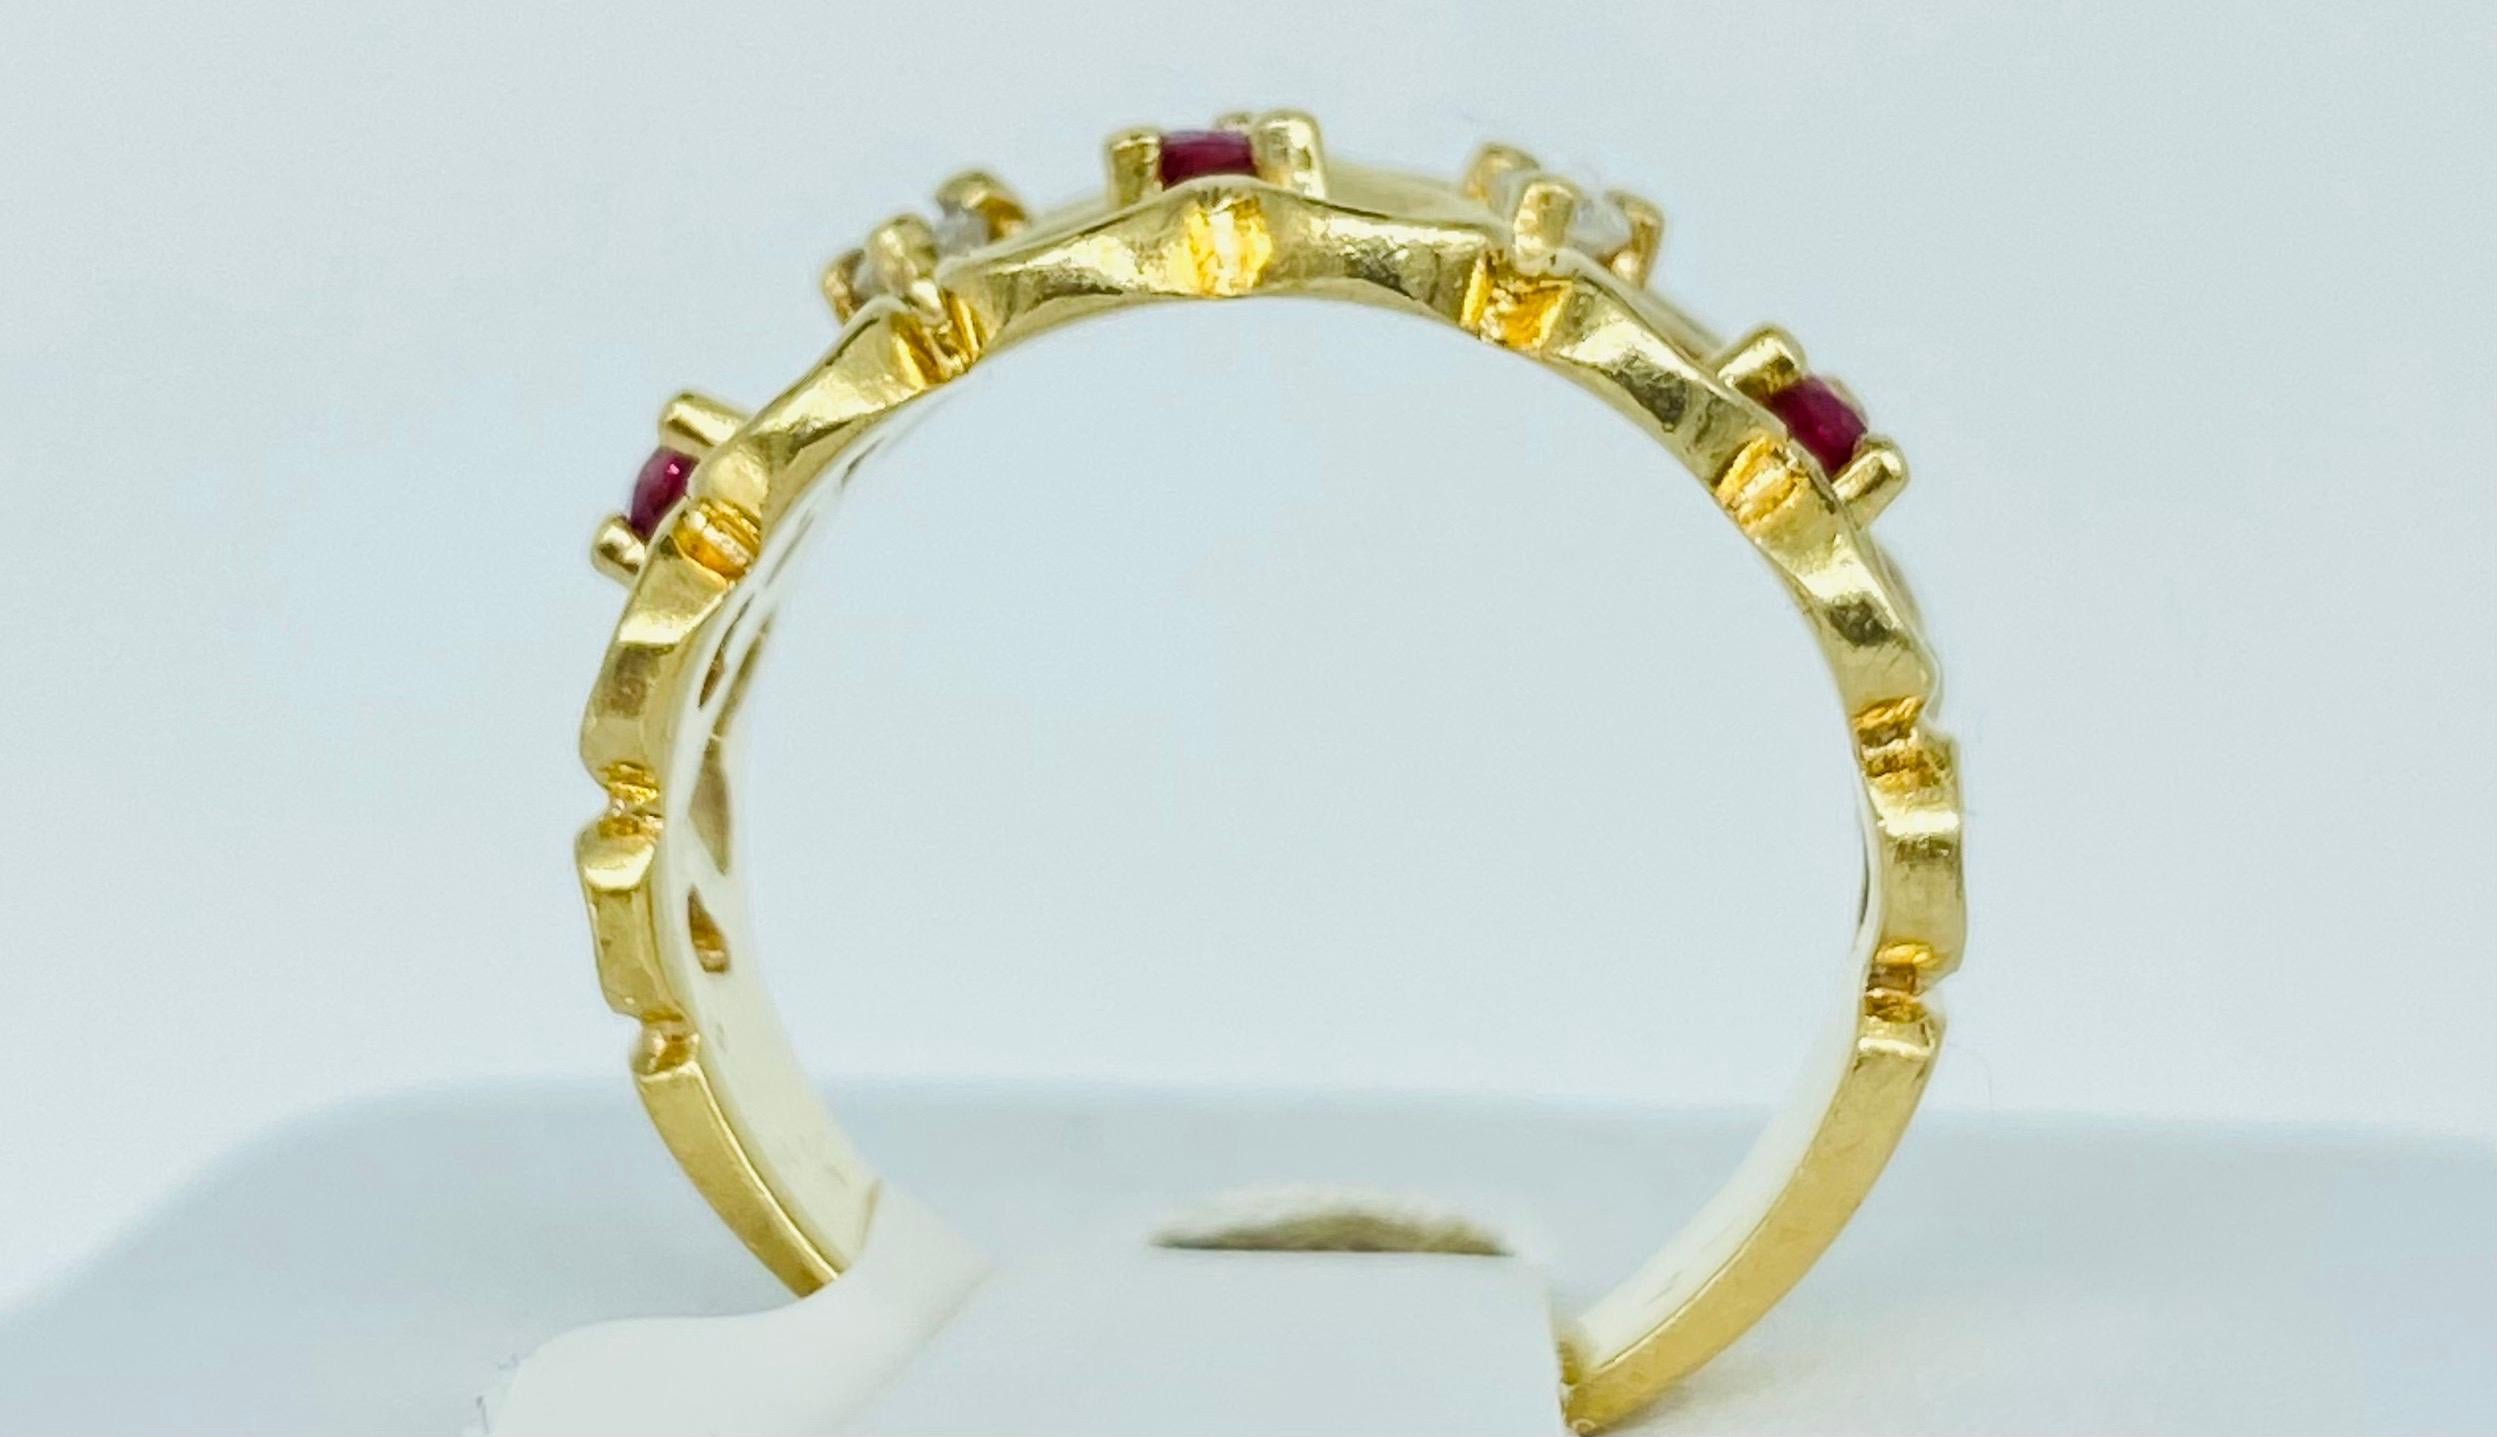 Diamond and Ruby Heart Shape Eternity Ring 14k Gold In Excellent Condition For Sale In Miami, FL